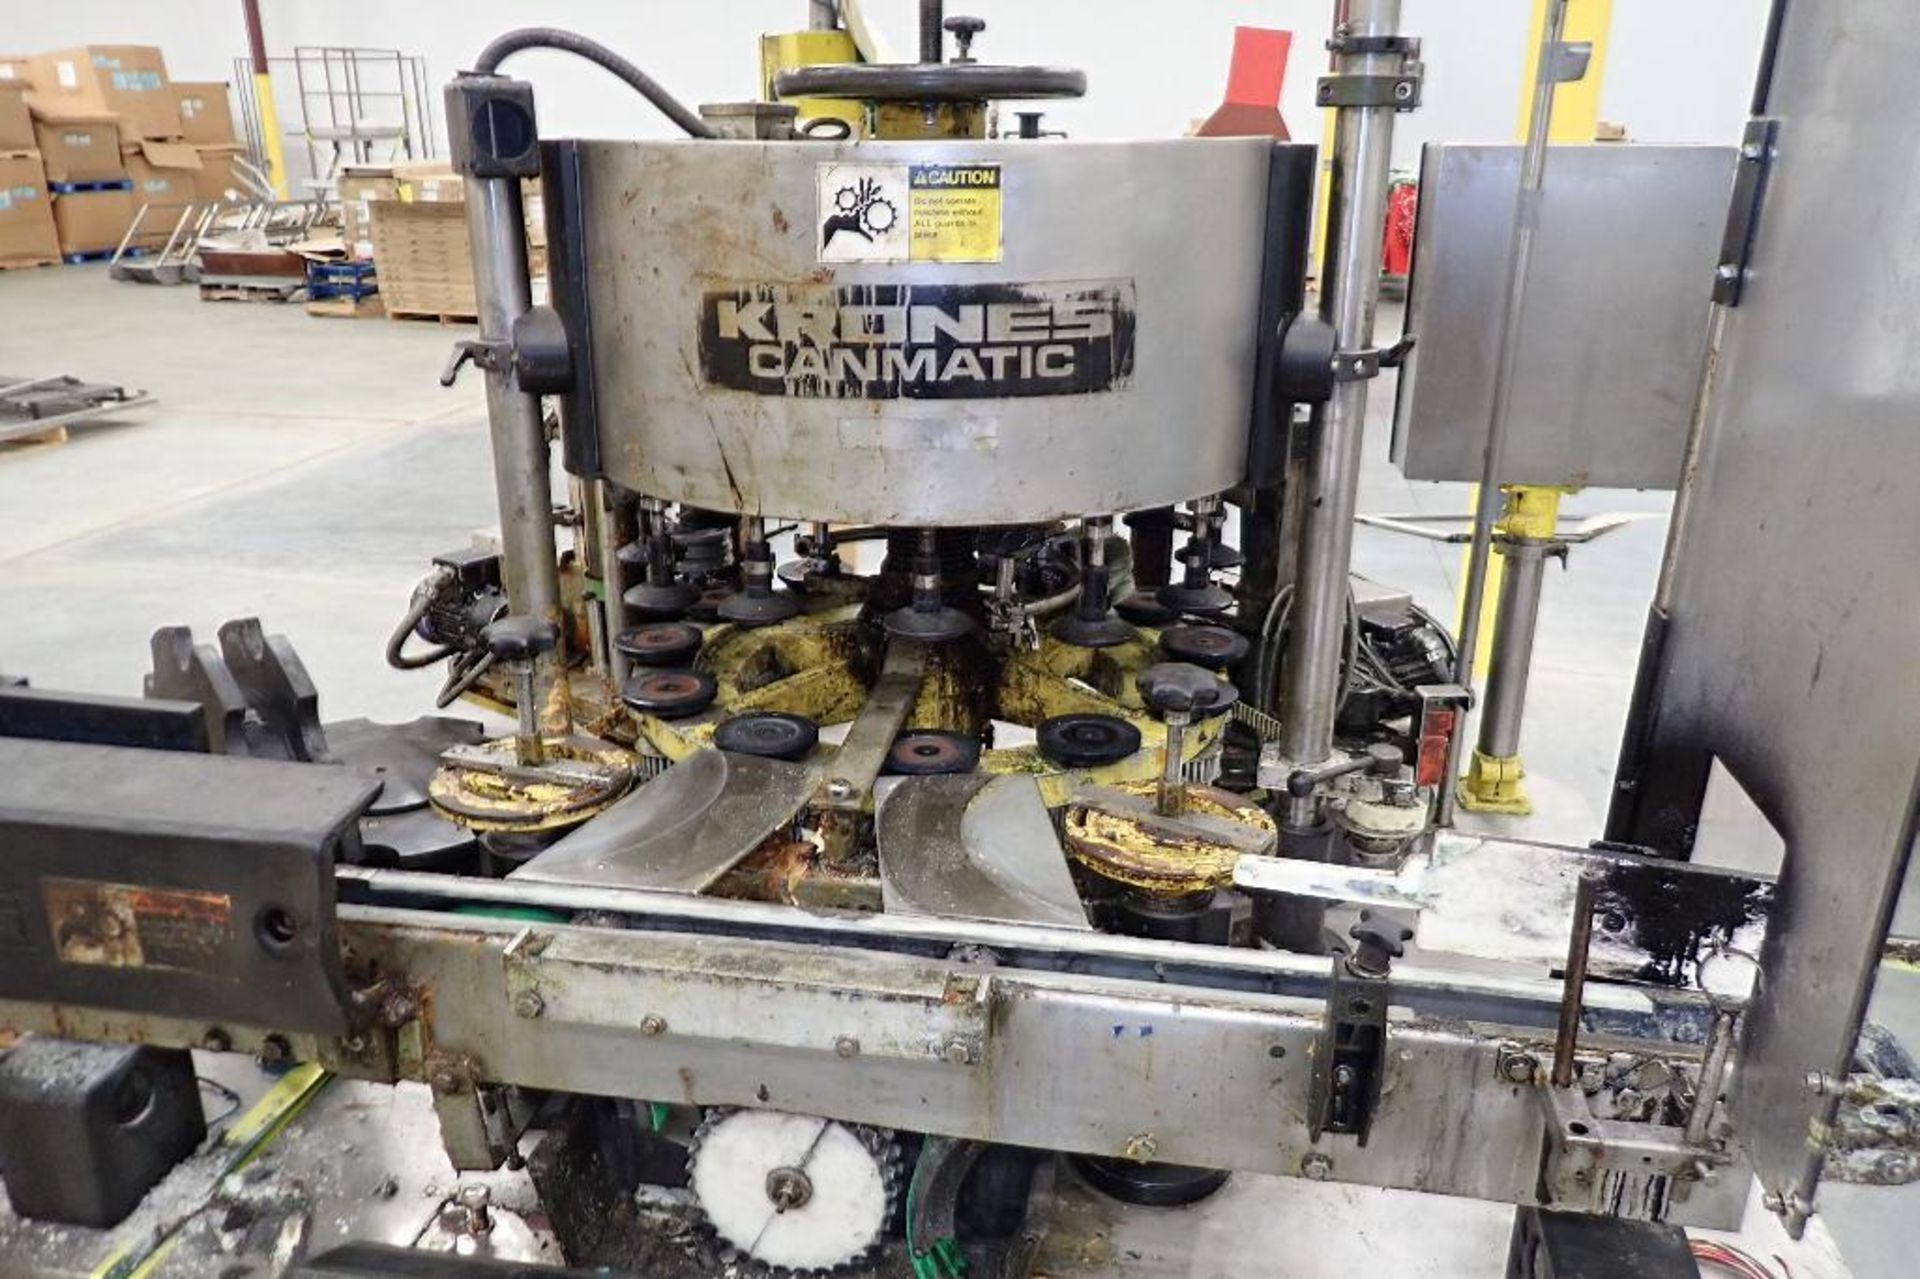 Krones canmatic labeler, with controls, spare parts and change parts on (4) skids. - ** Located in B - Bild 3 aus 15